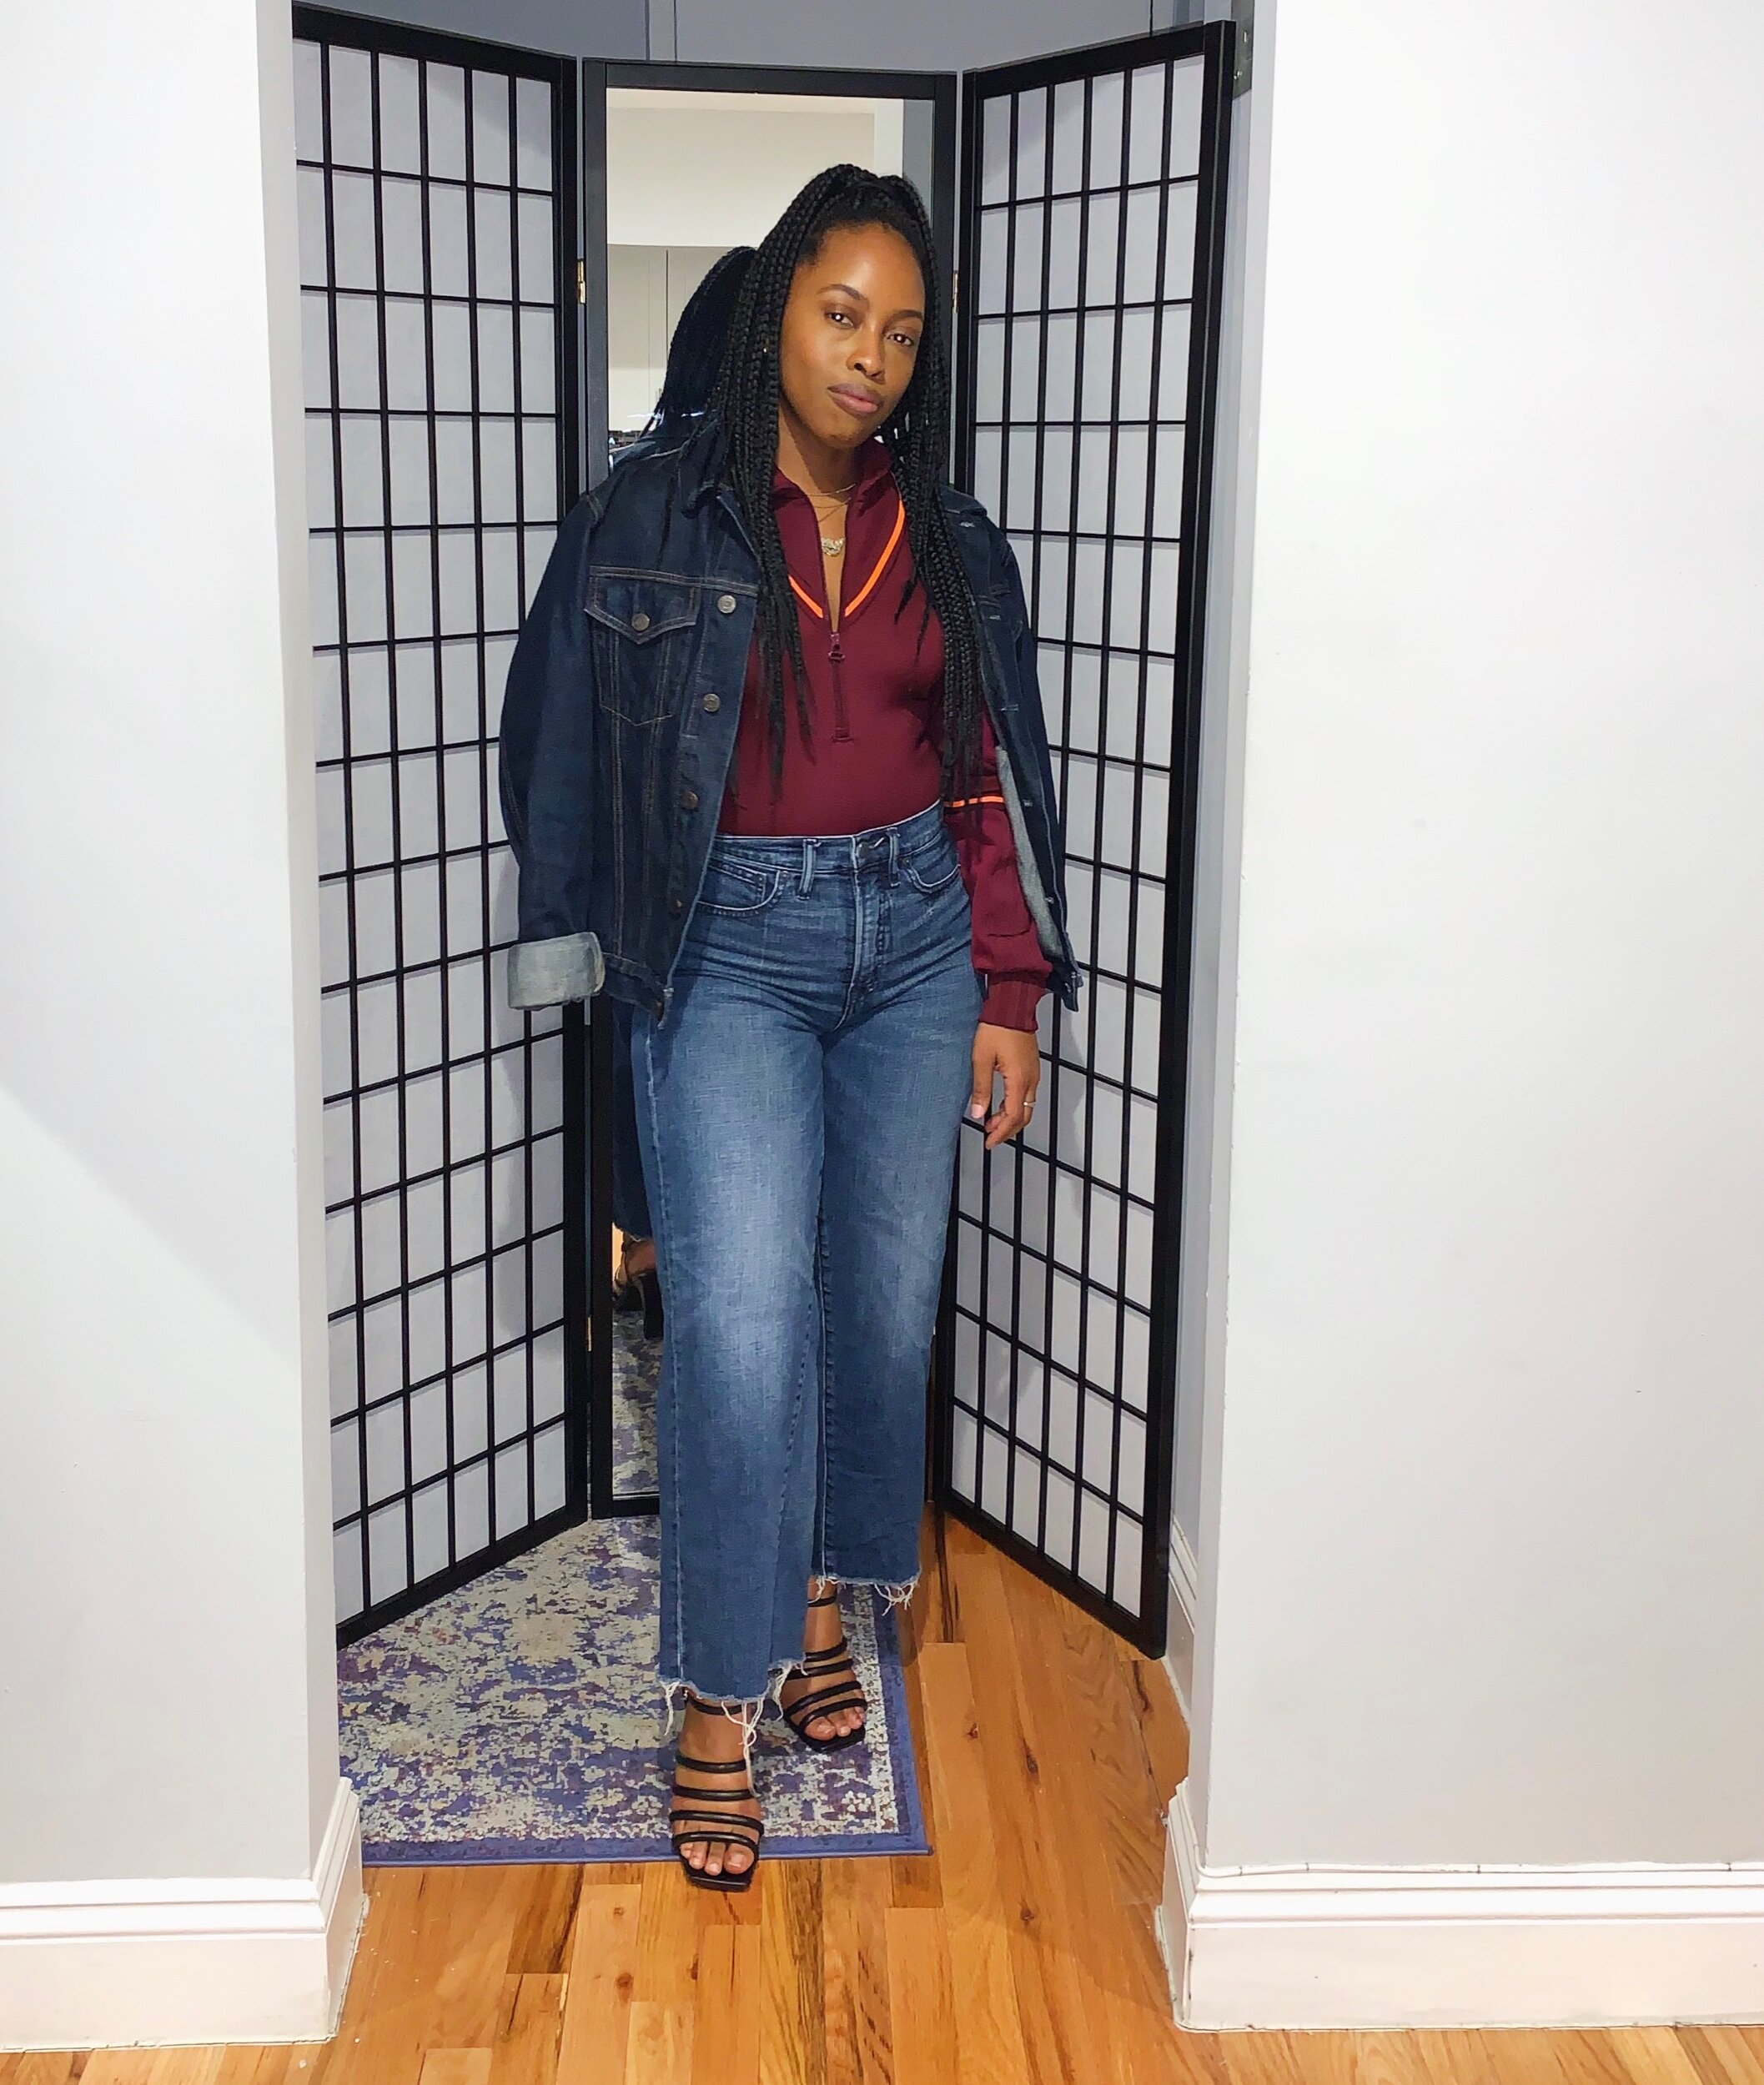   Outfit Combo #5: Denim Jacket + High Rise Wide-leg Jeans + Heeled Sandals  